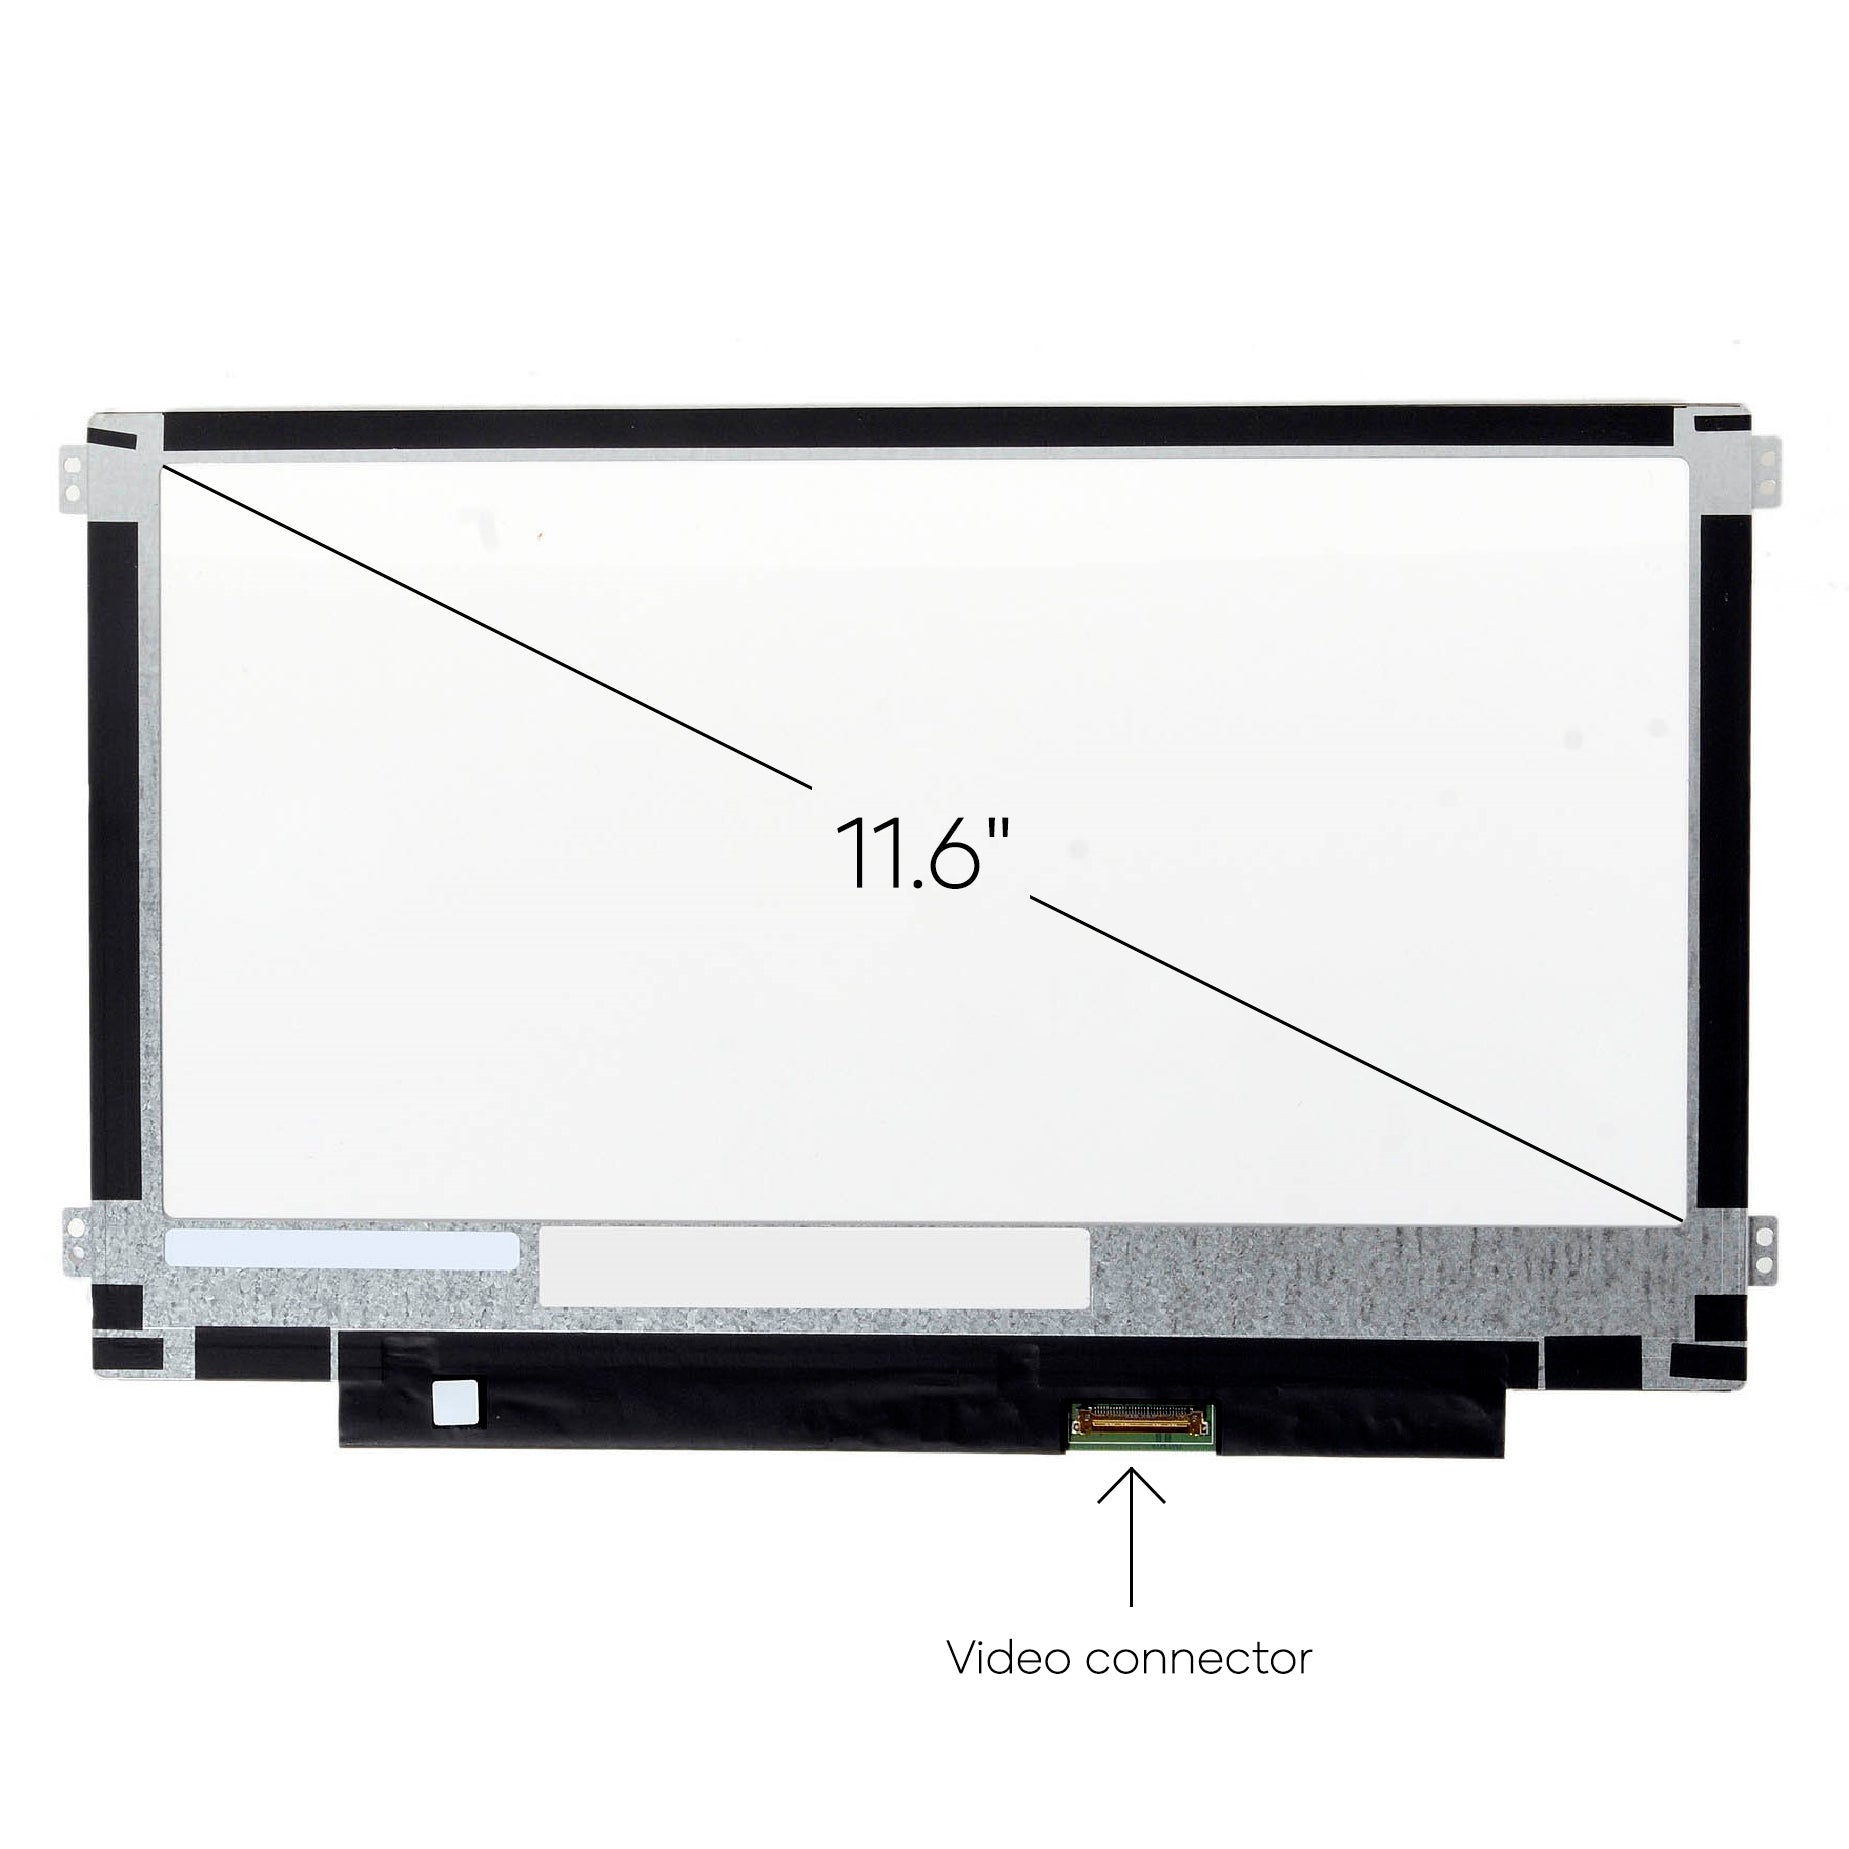 Screen Replacement for Samsung Chromebook XE500C12-K01US HD 1366x768 Matte LCD LED Display